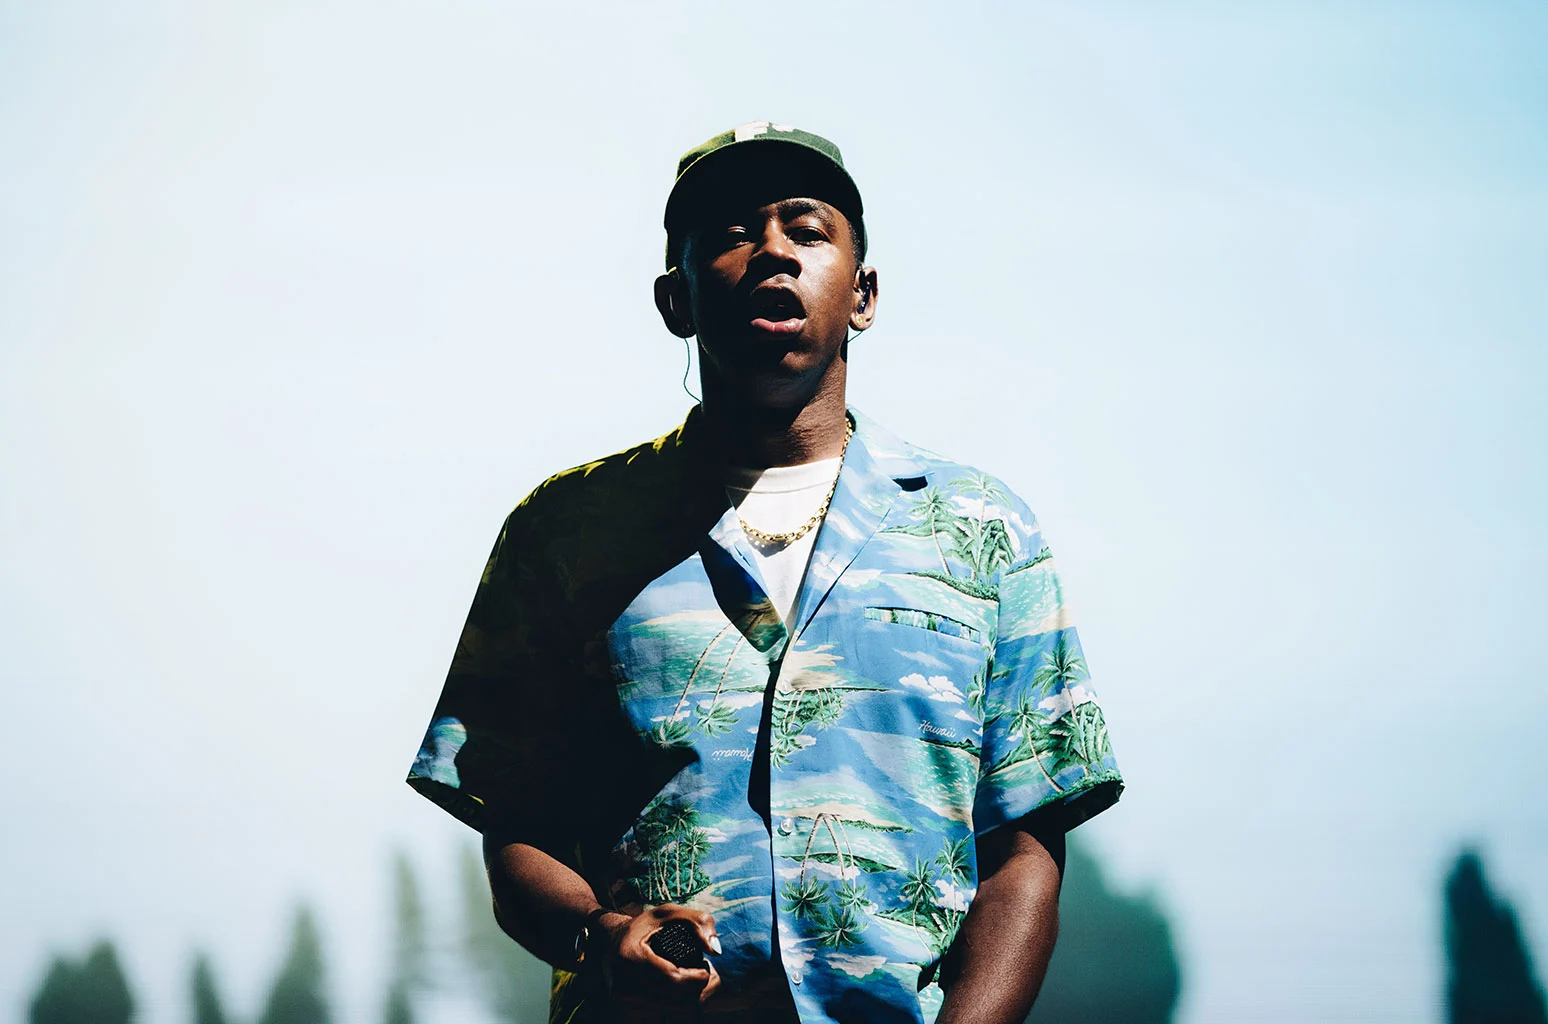 WPGM Recommends: Tyler The Creator - Call Me If You Get Lost: The